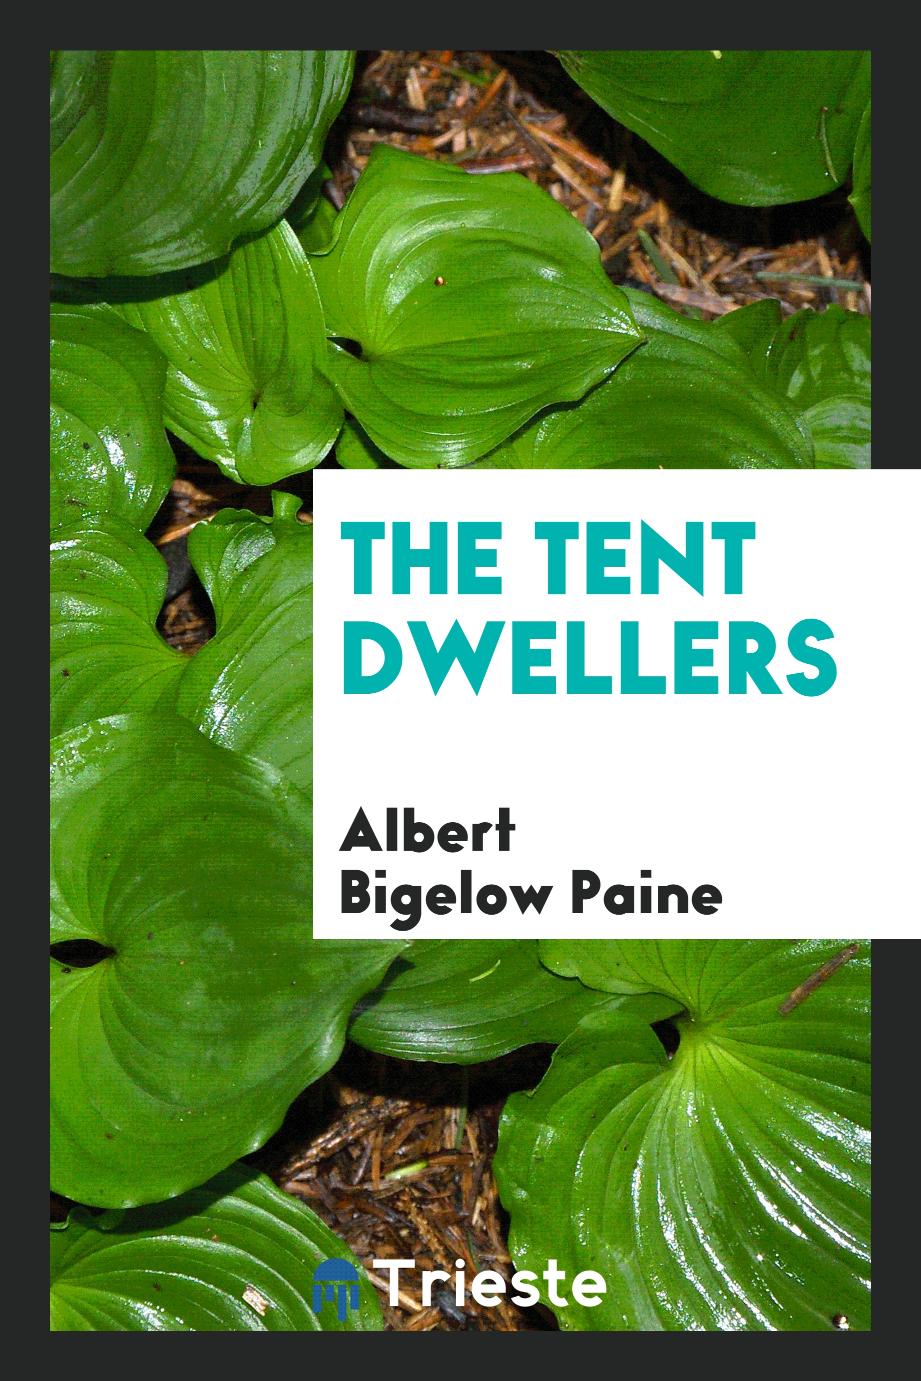 The tent dwellers